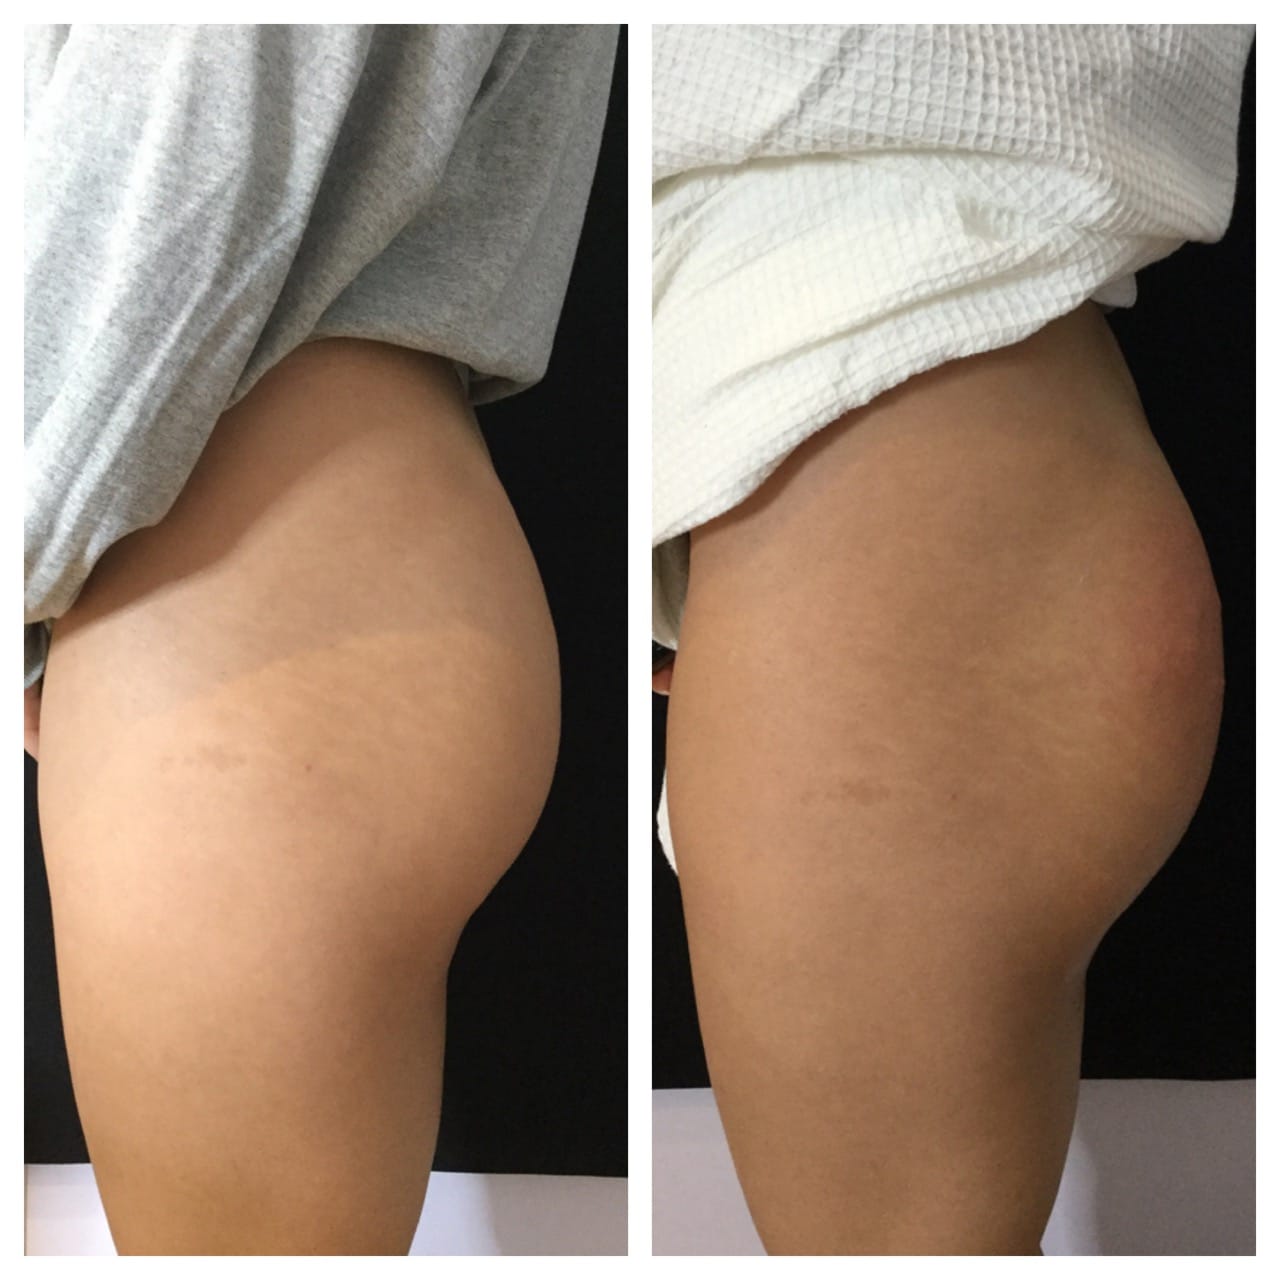 Sculptra Injections for Hip Dips Treatments in Queens, NY